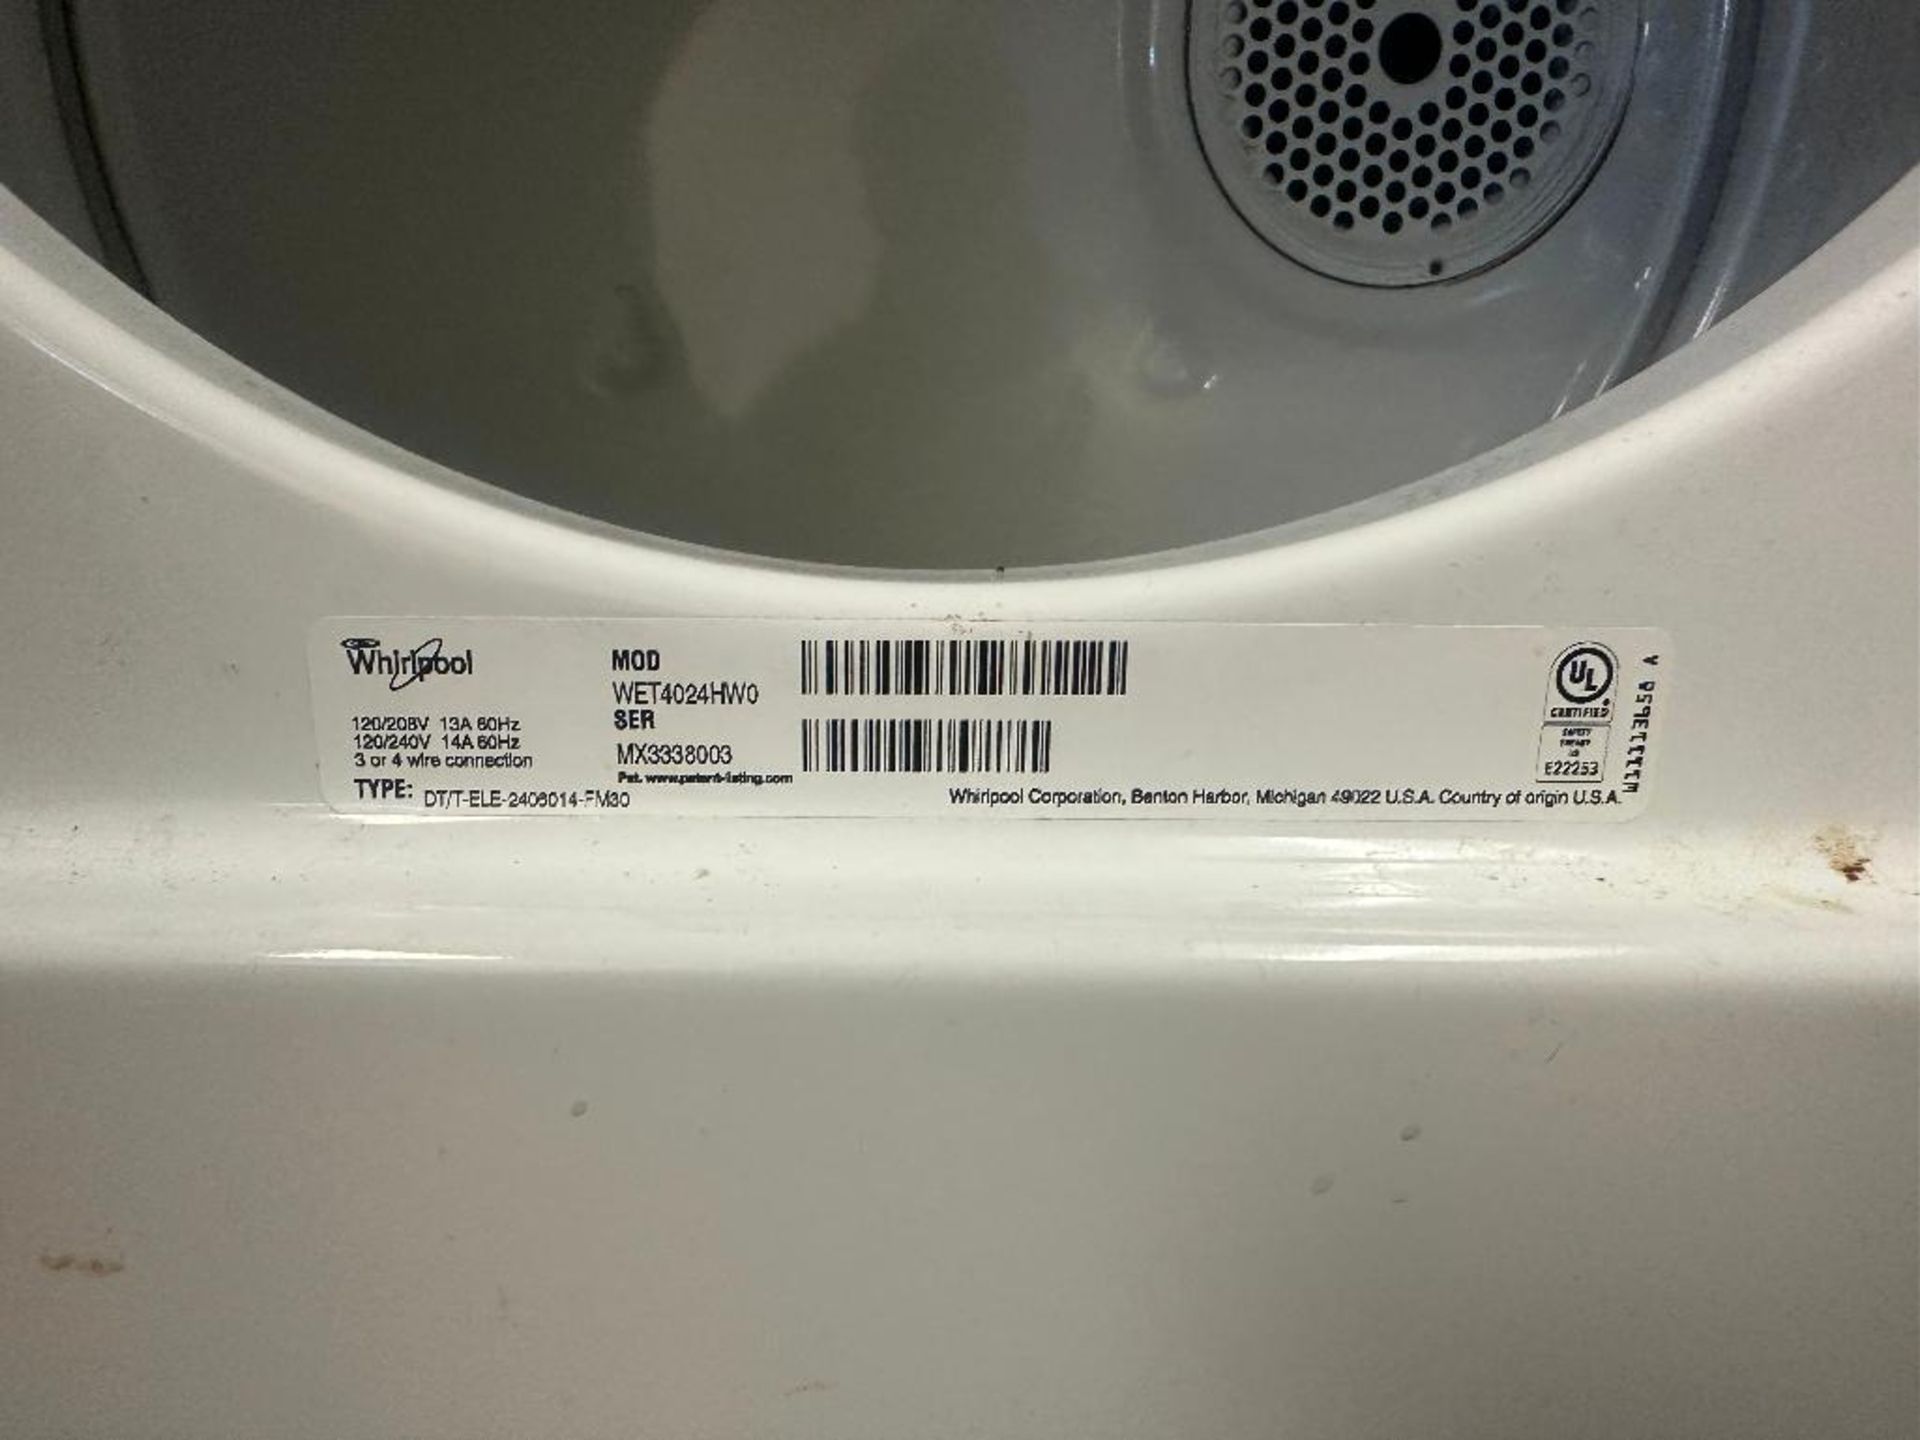 DESCRIPTION WHIRLPOOL WASHER AND DRYER ALL IN ONE BRAND / MODEL: WHIRLPOOL LOCATION 7399 O'Connor Dr - Bild 3 aus 4